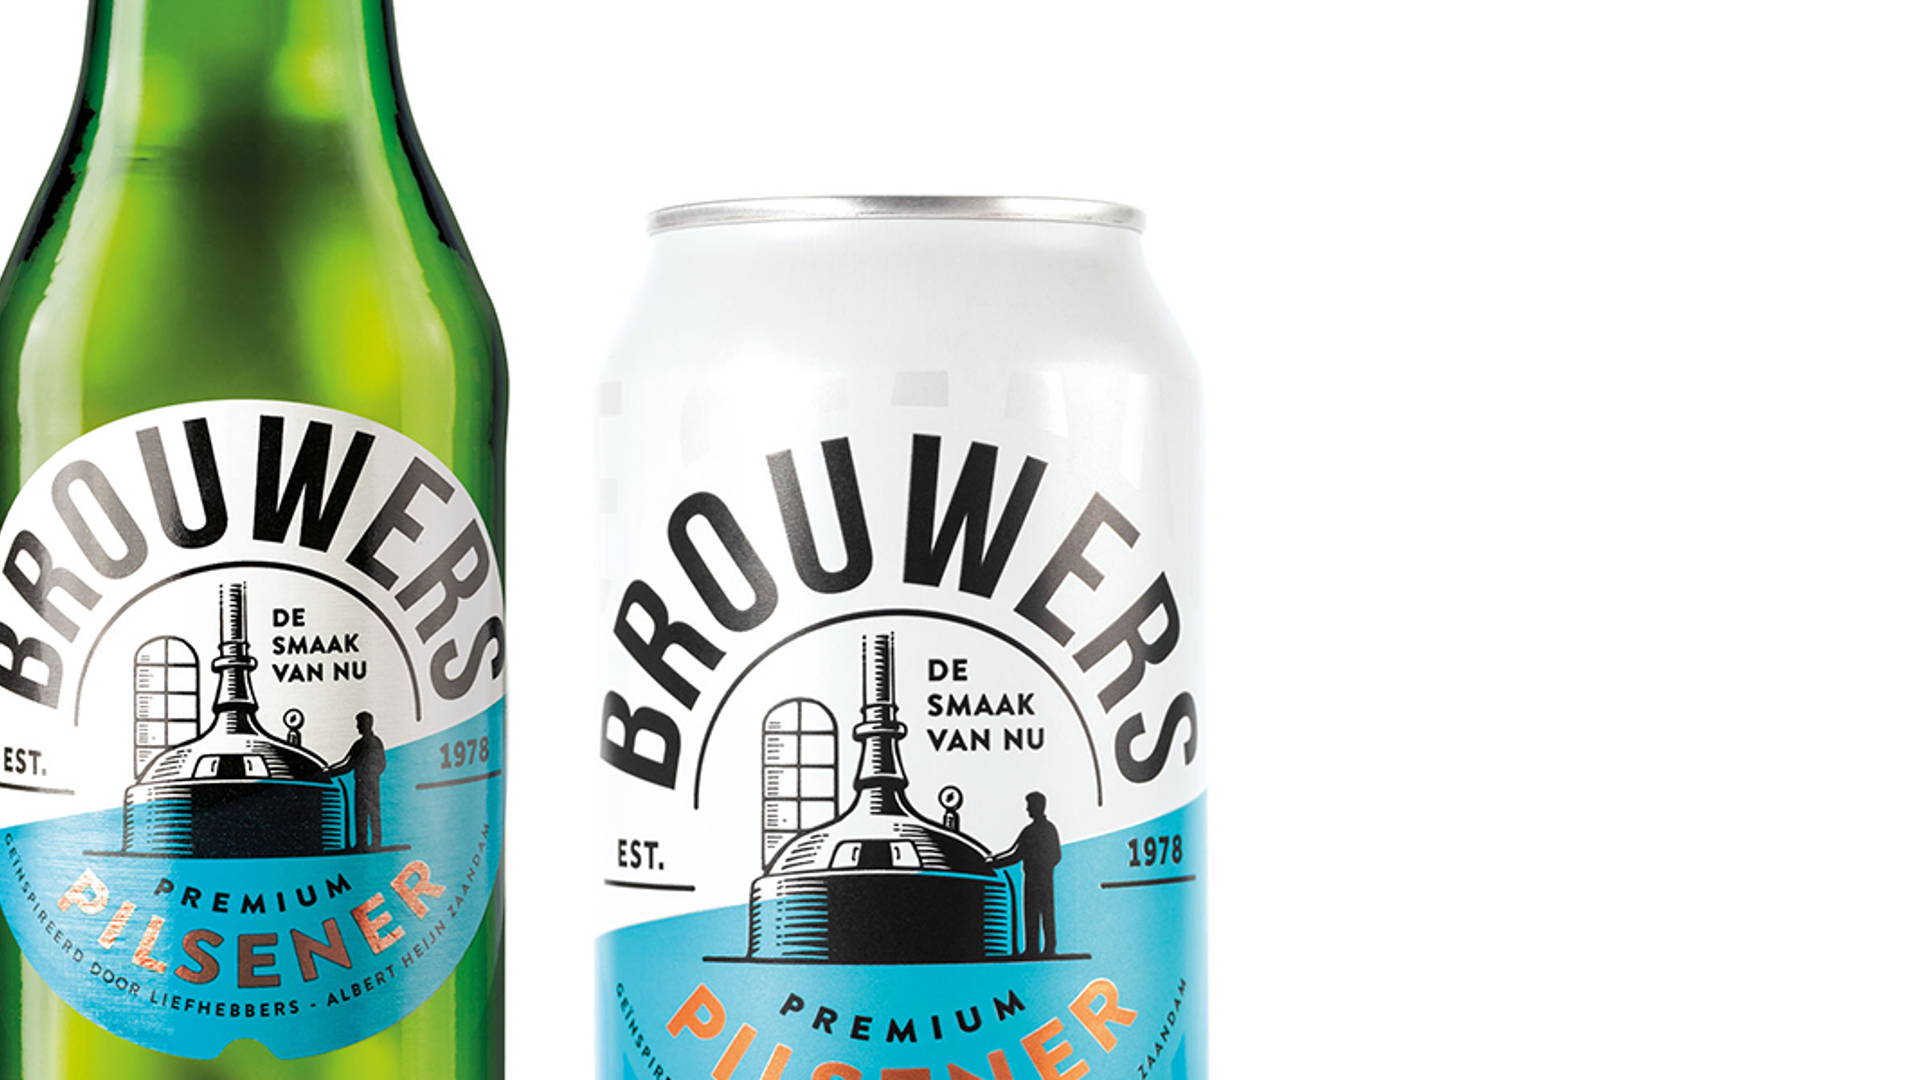 Featured image for BROUWERS